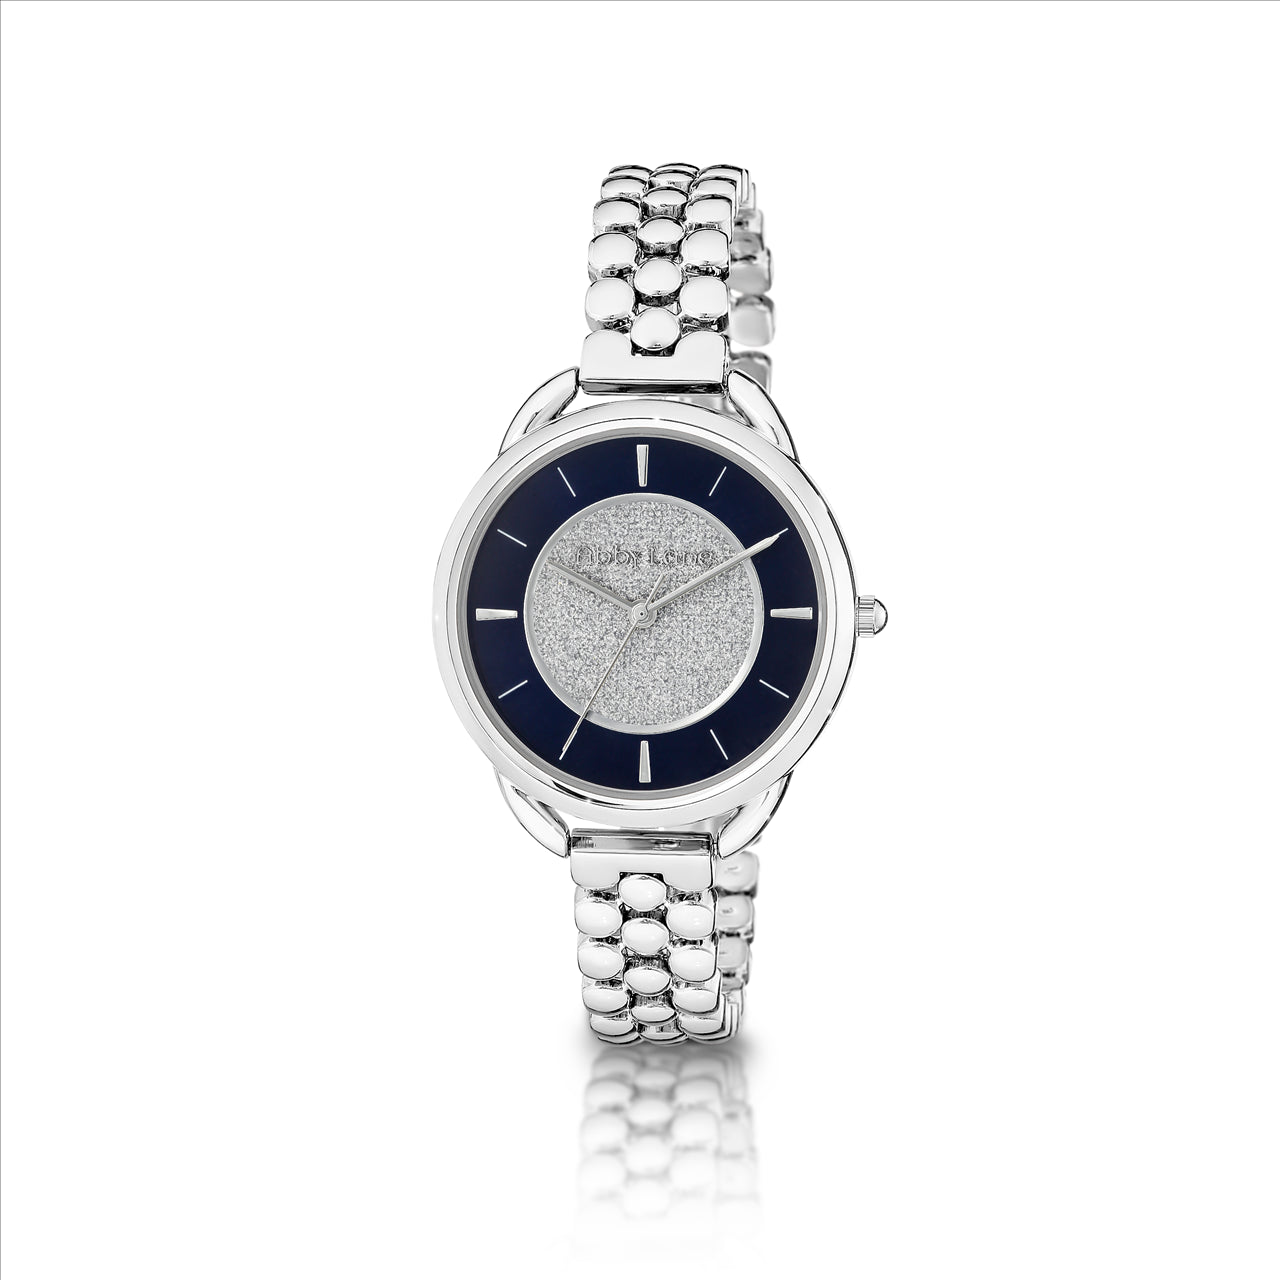 Abby lane victoria silvertone case. navy sunray + silver sparkle inner dial with silver accents. silvertone bracelet. case size 35mm